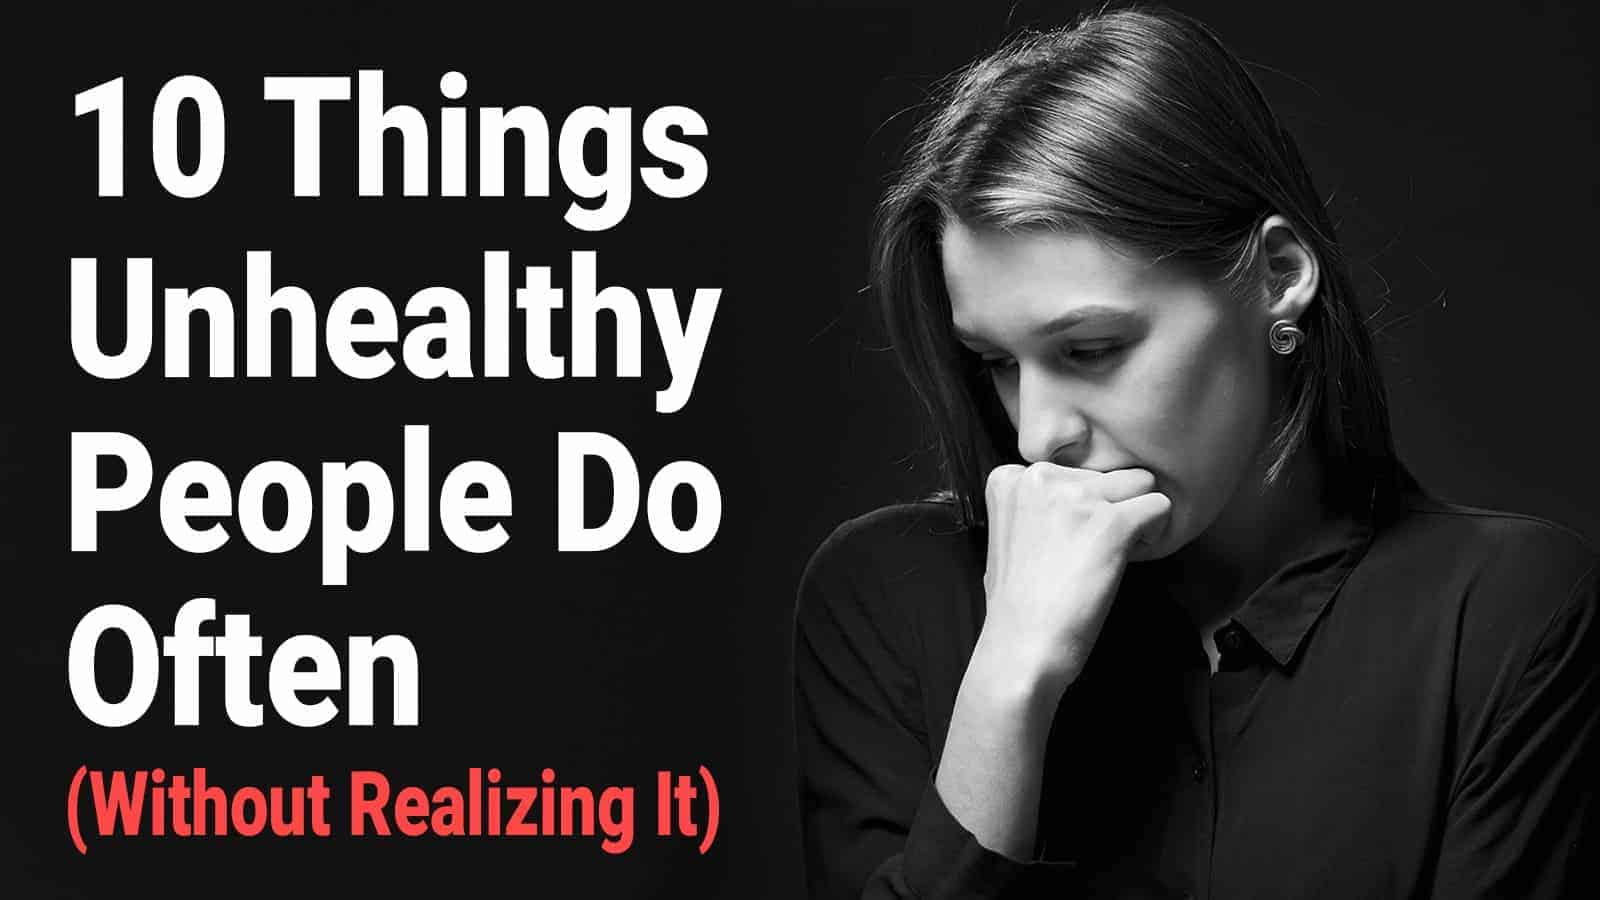 10 Things Unhealthy People Do Often (Without Realizing It)